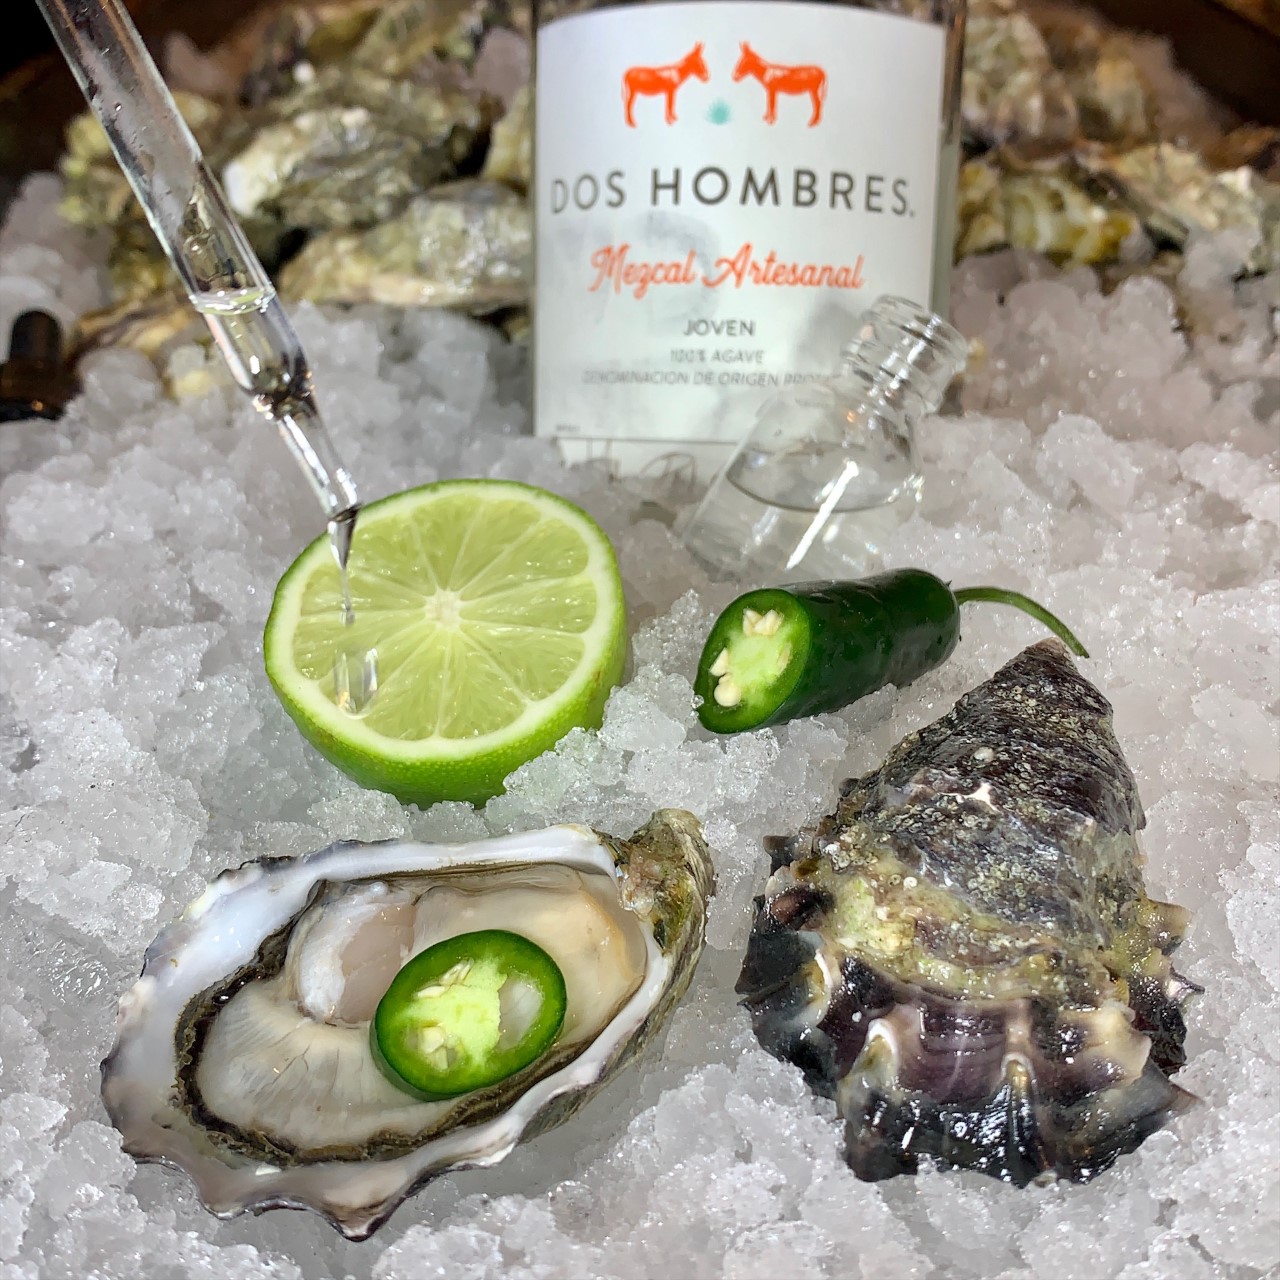 Photograph of Mezcal Jalapeno Oyster served at Raw Bar on ice